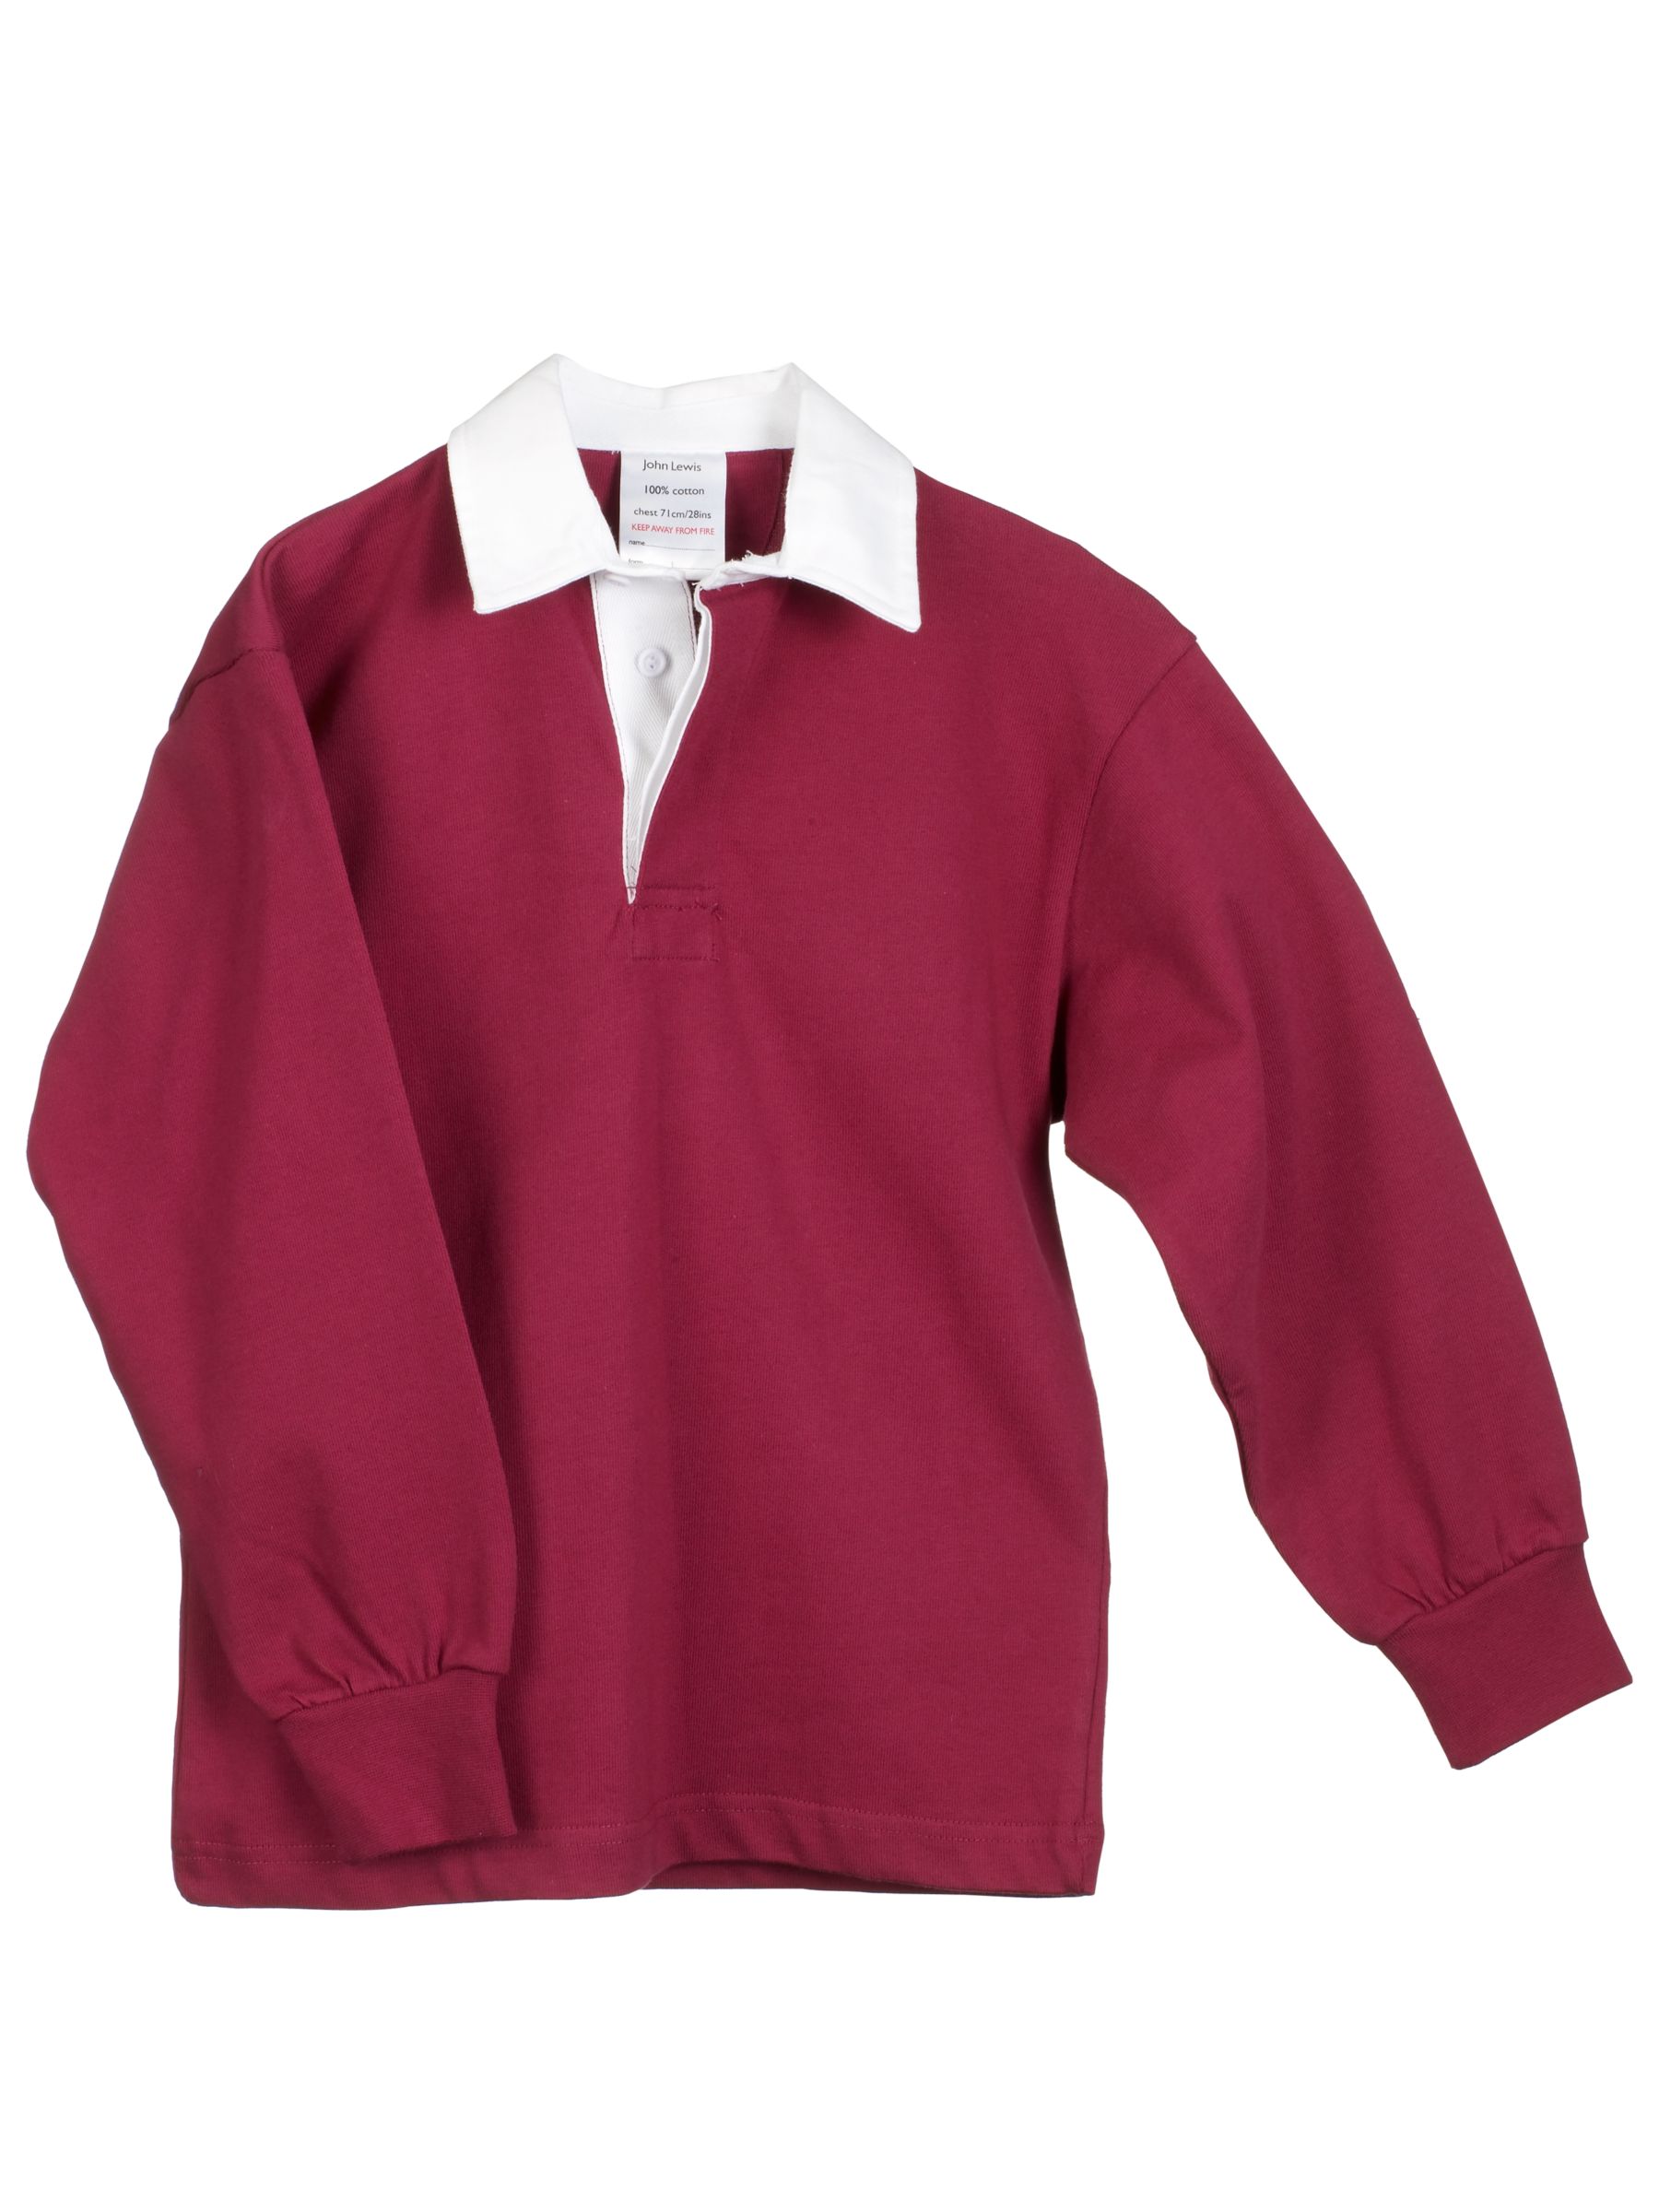 Cotton Rugby Shirt, Maroon, Age 13-14